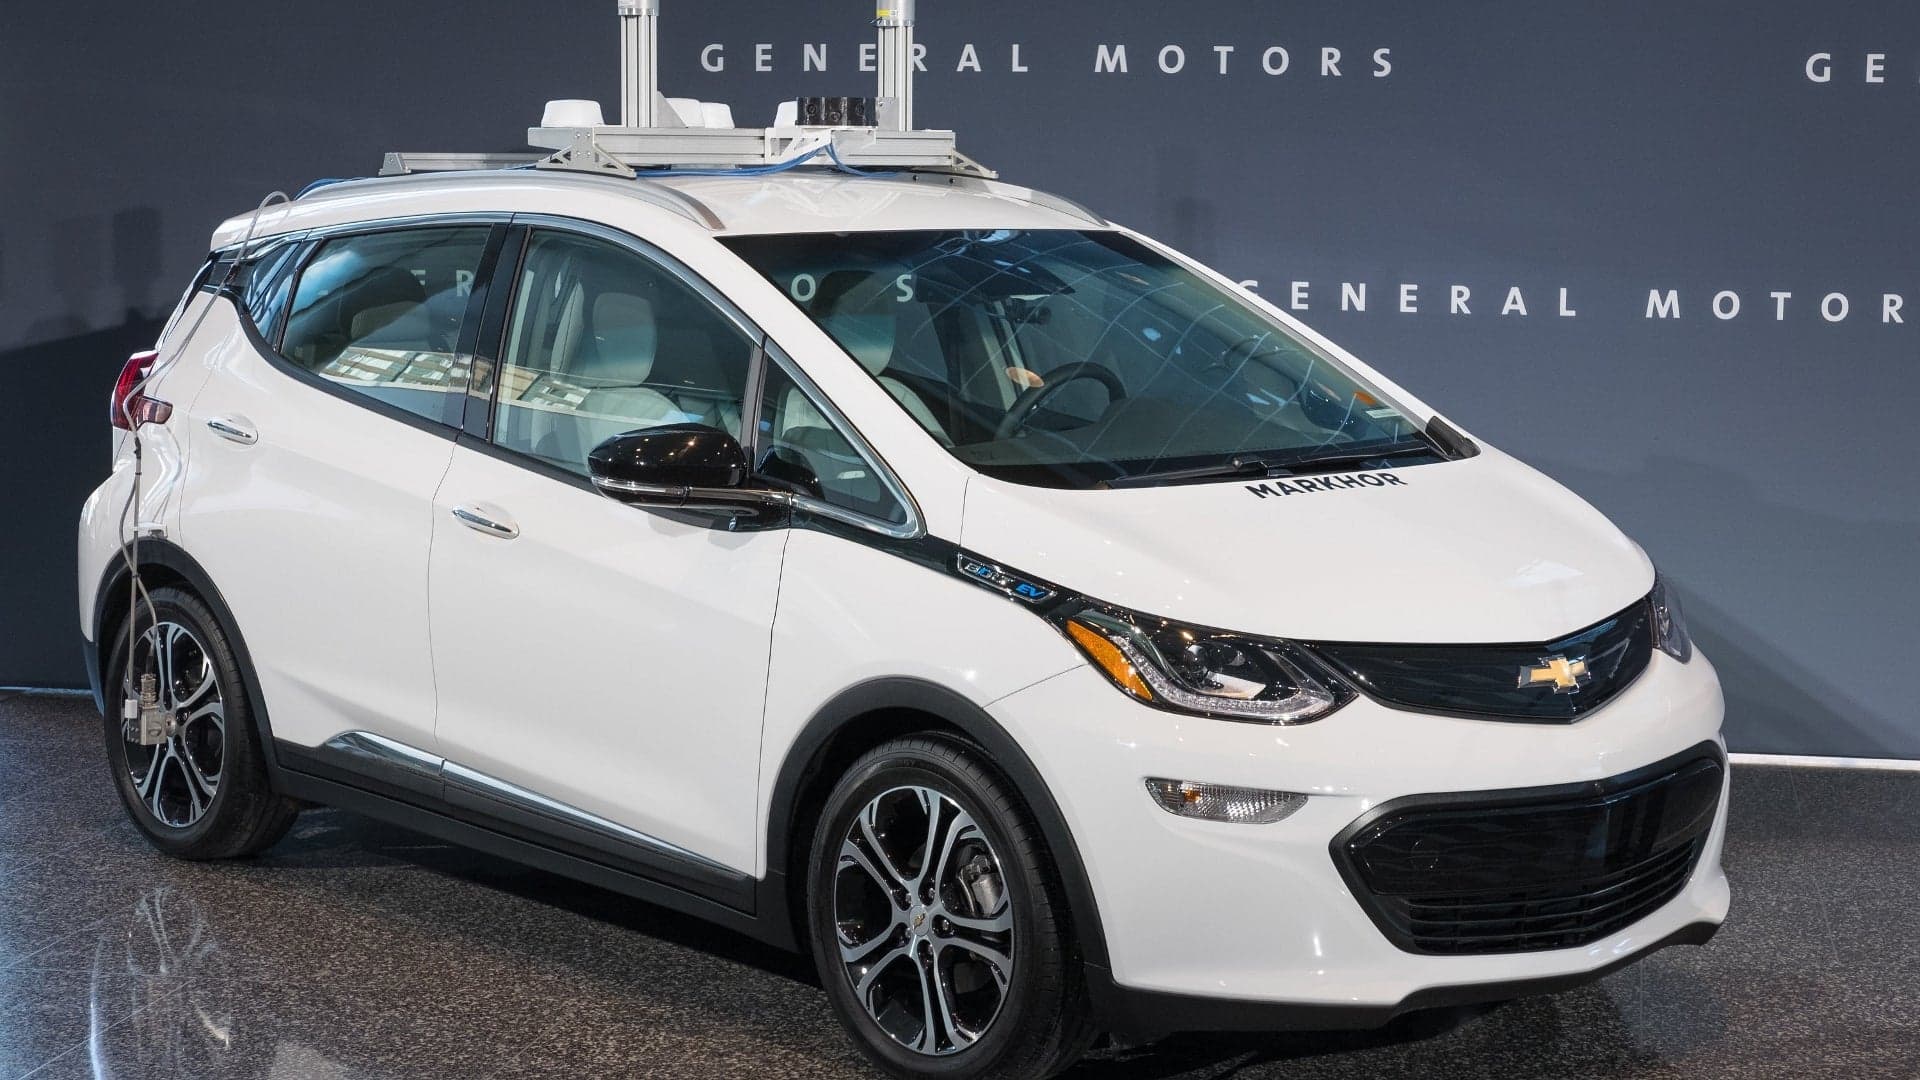 GM’s Cruise Automation Wants to Make HD Maps for Self-Driving Cars